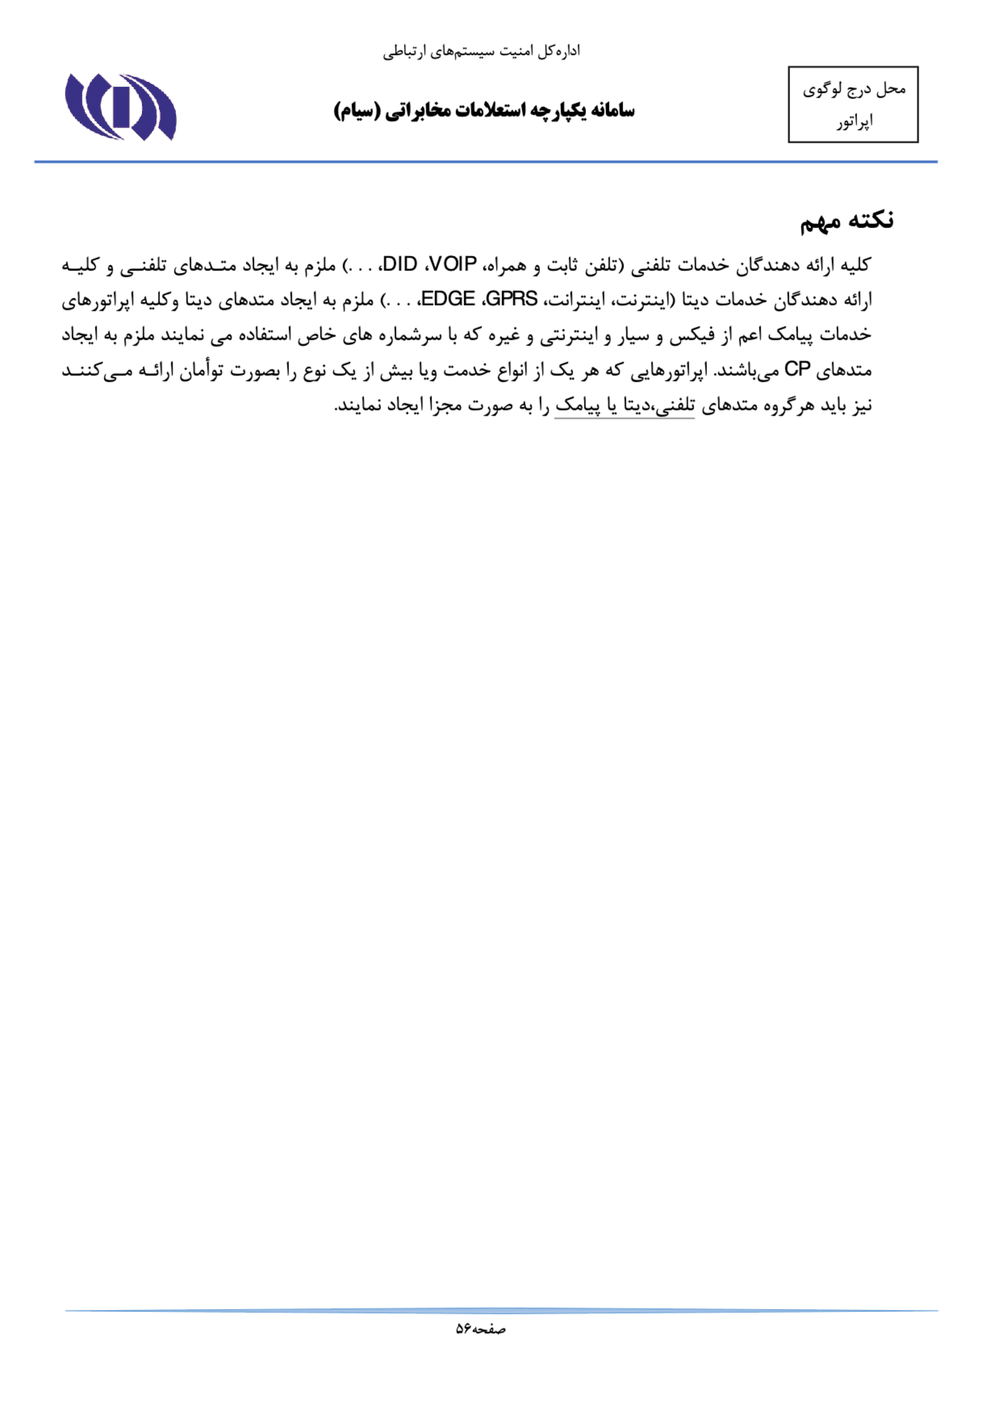 Page 56 from Iran’s SIAM Manual in Persian for Tracking and Controlling Mobile Phones